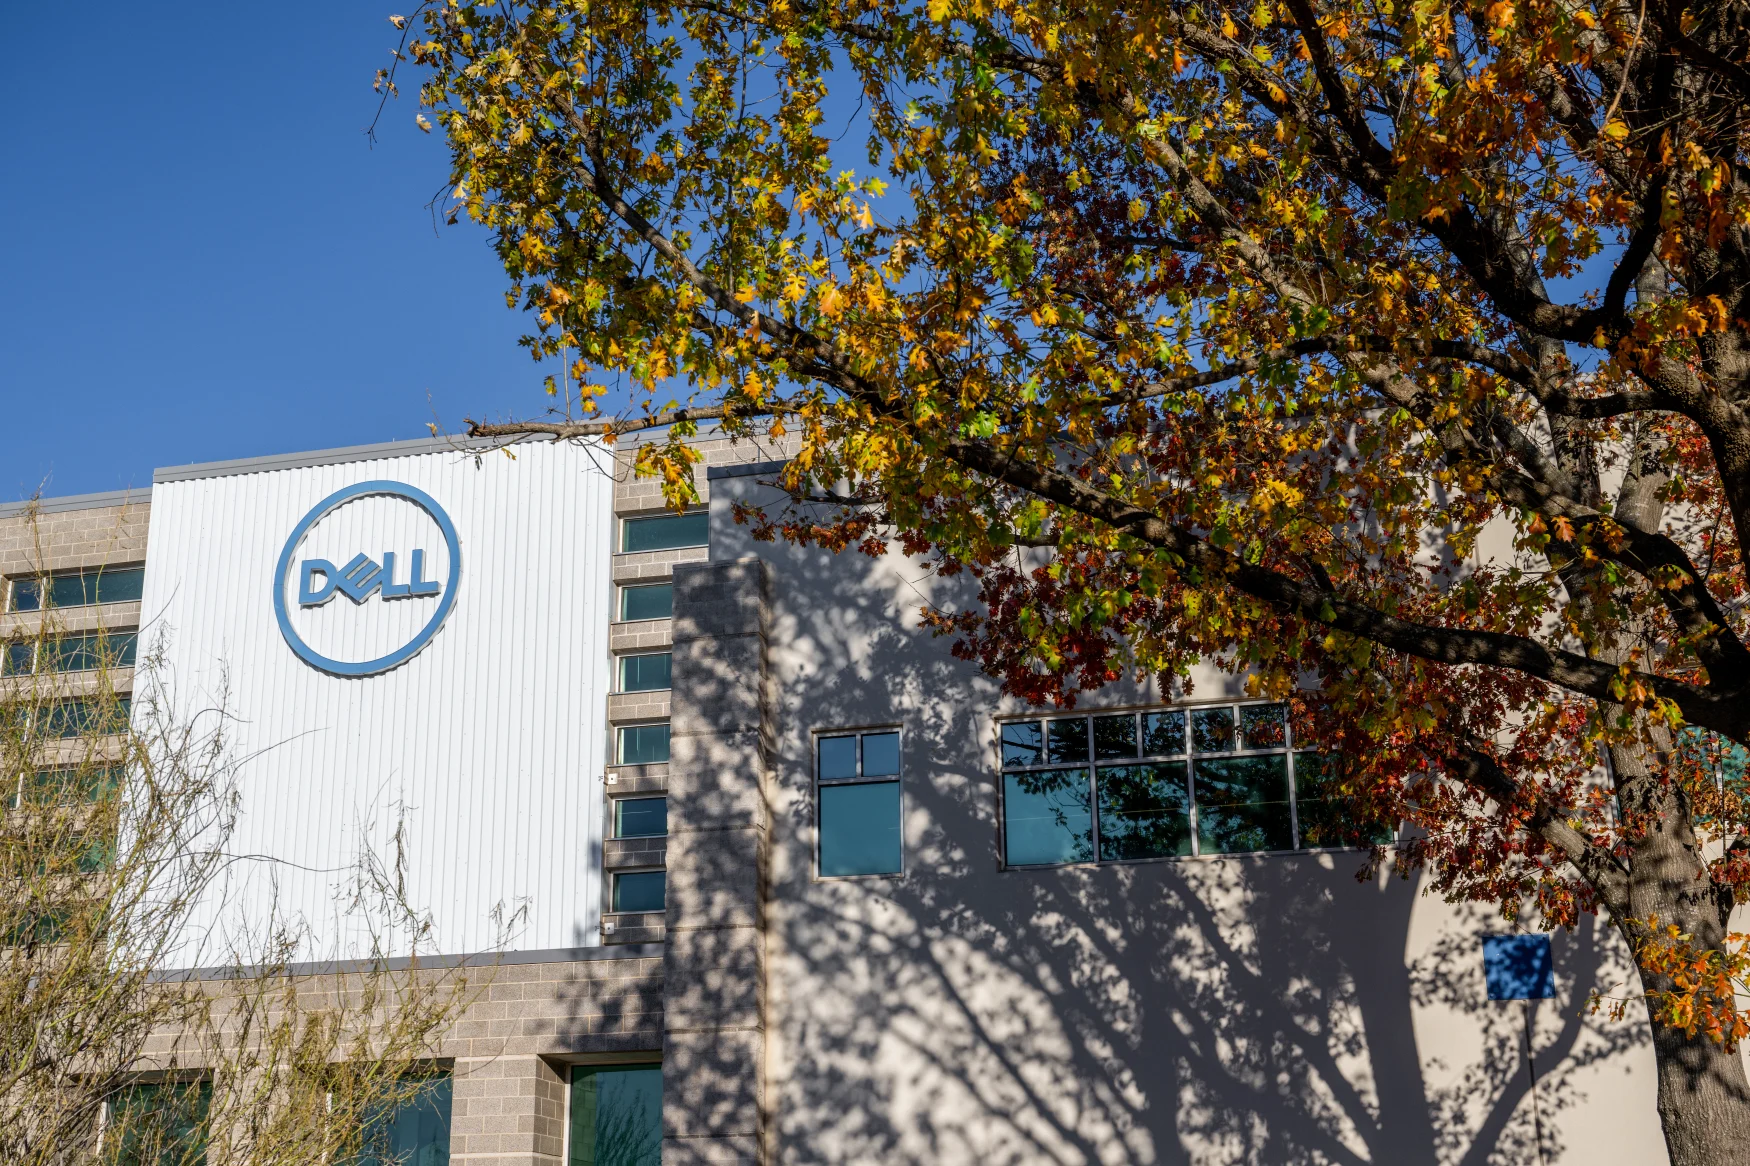 ROUND ROCK, TEXAS - JANUARY 04: The exterior of a Dell Technologies office building is seen on January 04, 2023 in Round Rock, Texas. (Photo by Brandon Bell/Getty Images)